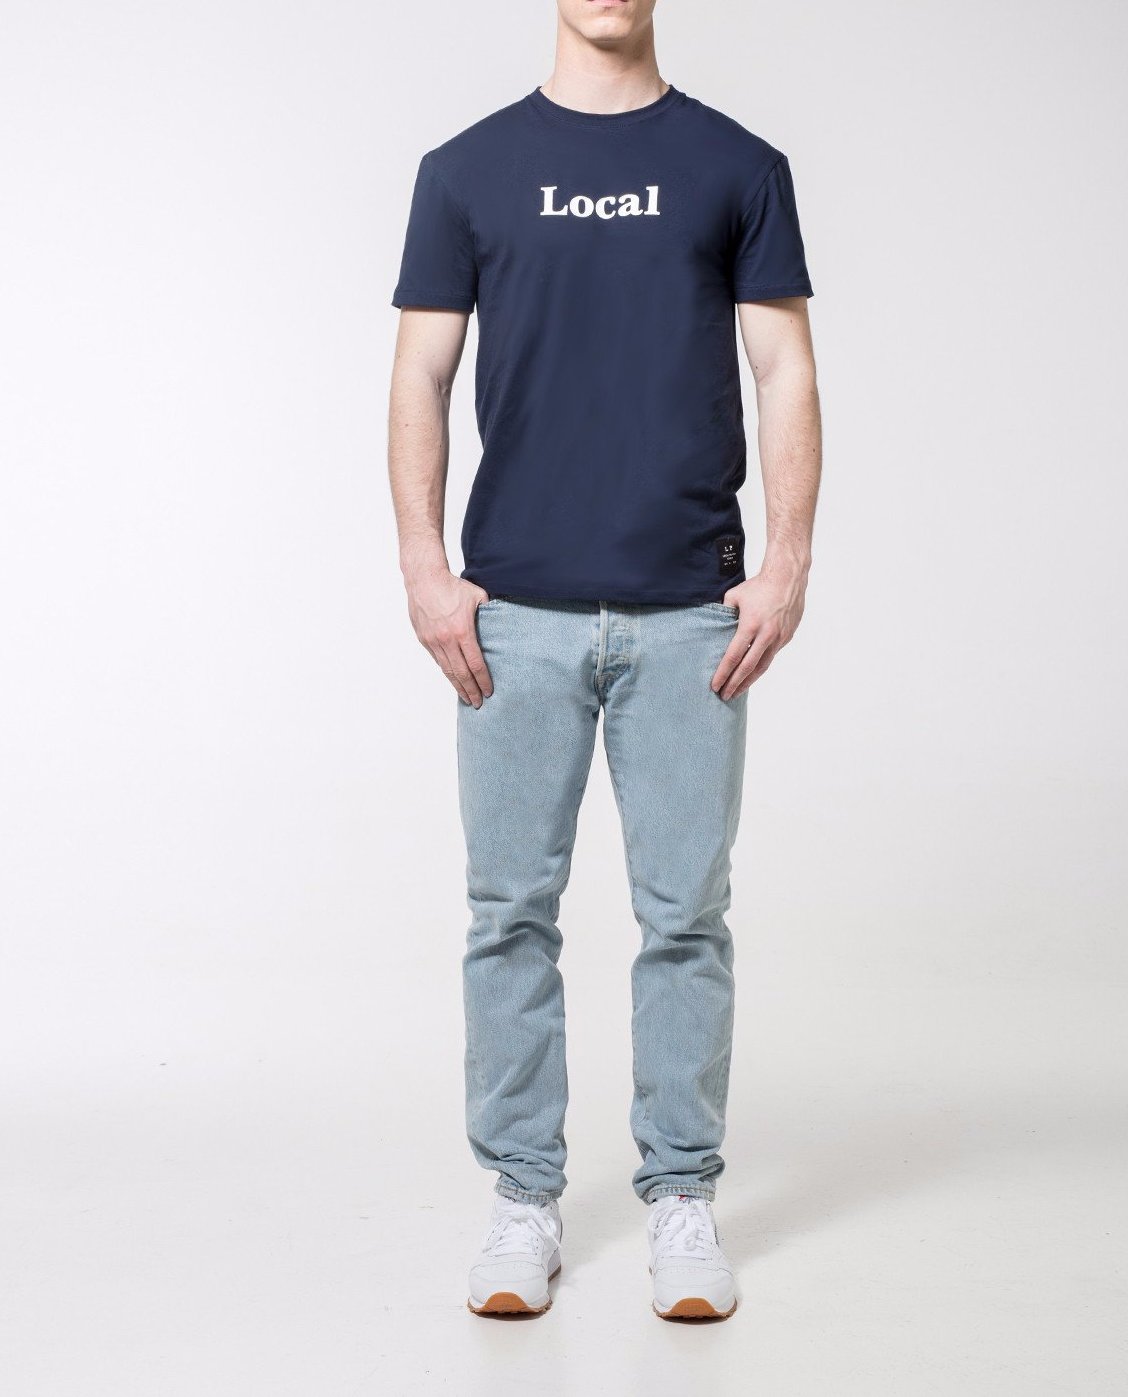 Local Tee - Local Pattern